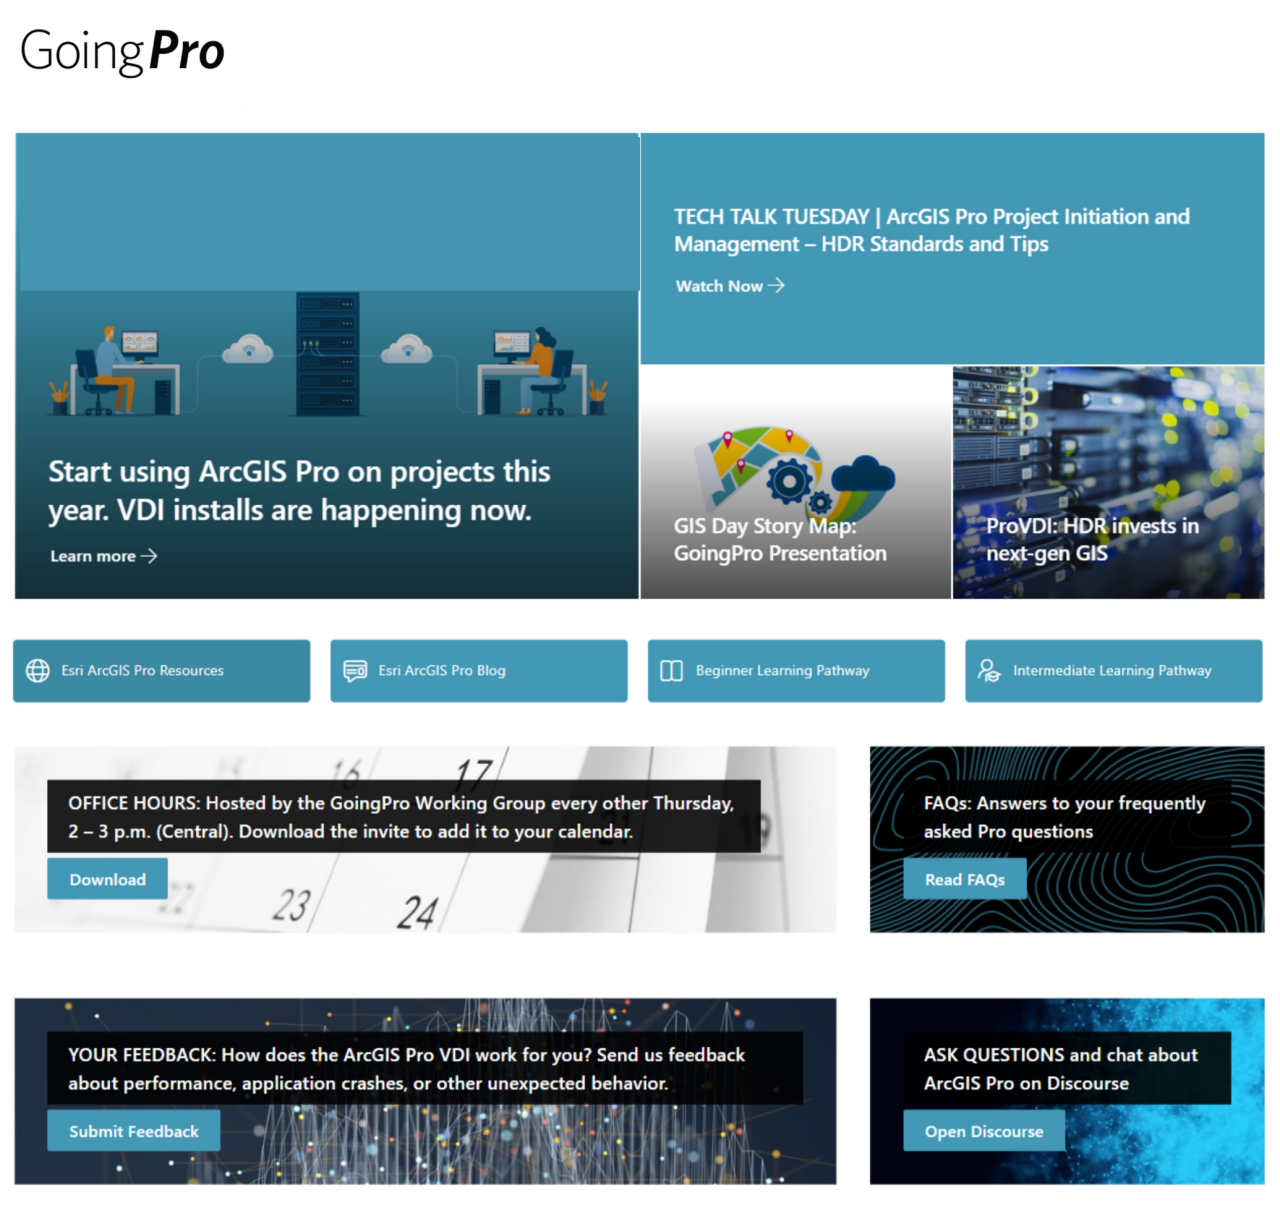 HDR internal Going Pro SharePoint Landing page interface 